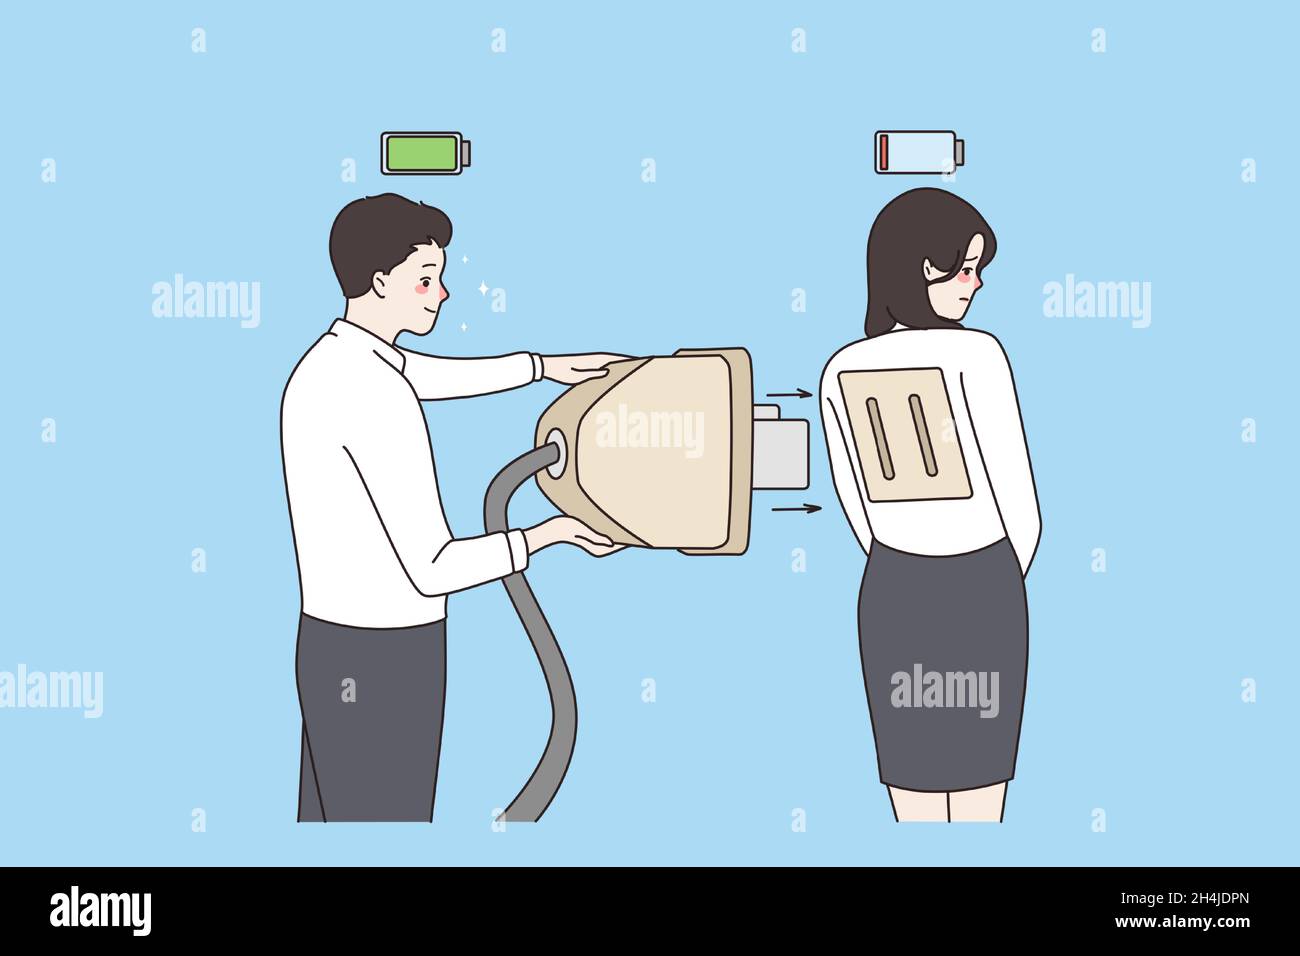 Happy energetic man put huge plug in socket to recharge tired unhappy woman colleague. Exhaustion at workplace. Job burnout problem. Businesspeople fatigue deal. Flat vector illustration.  Stock Vector